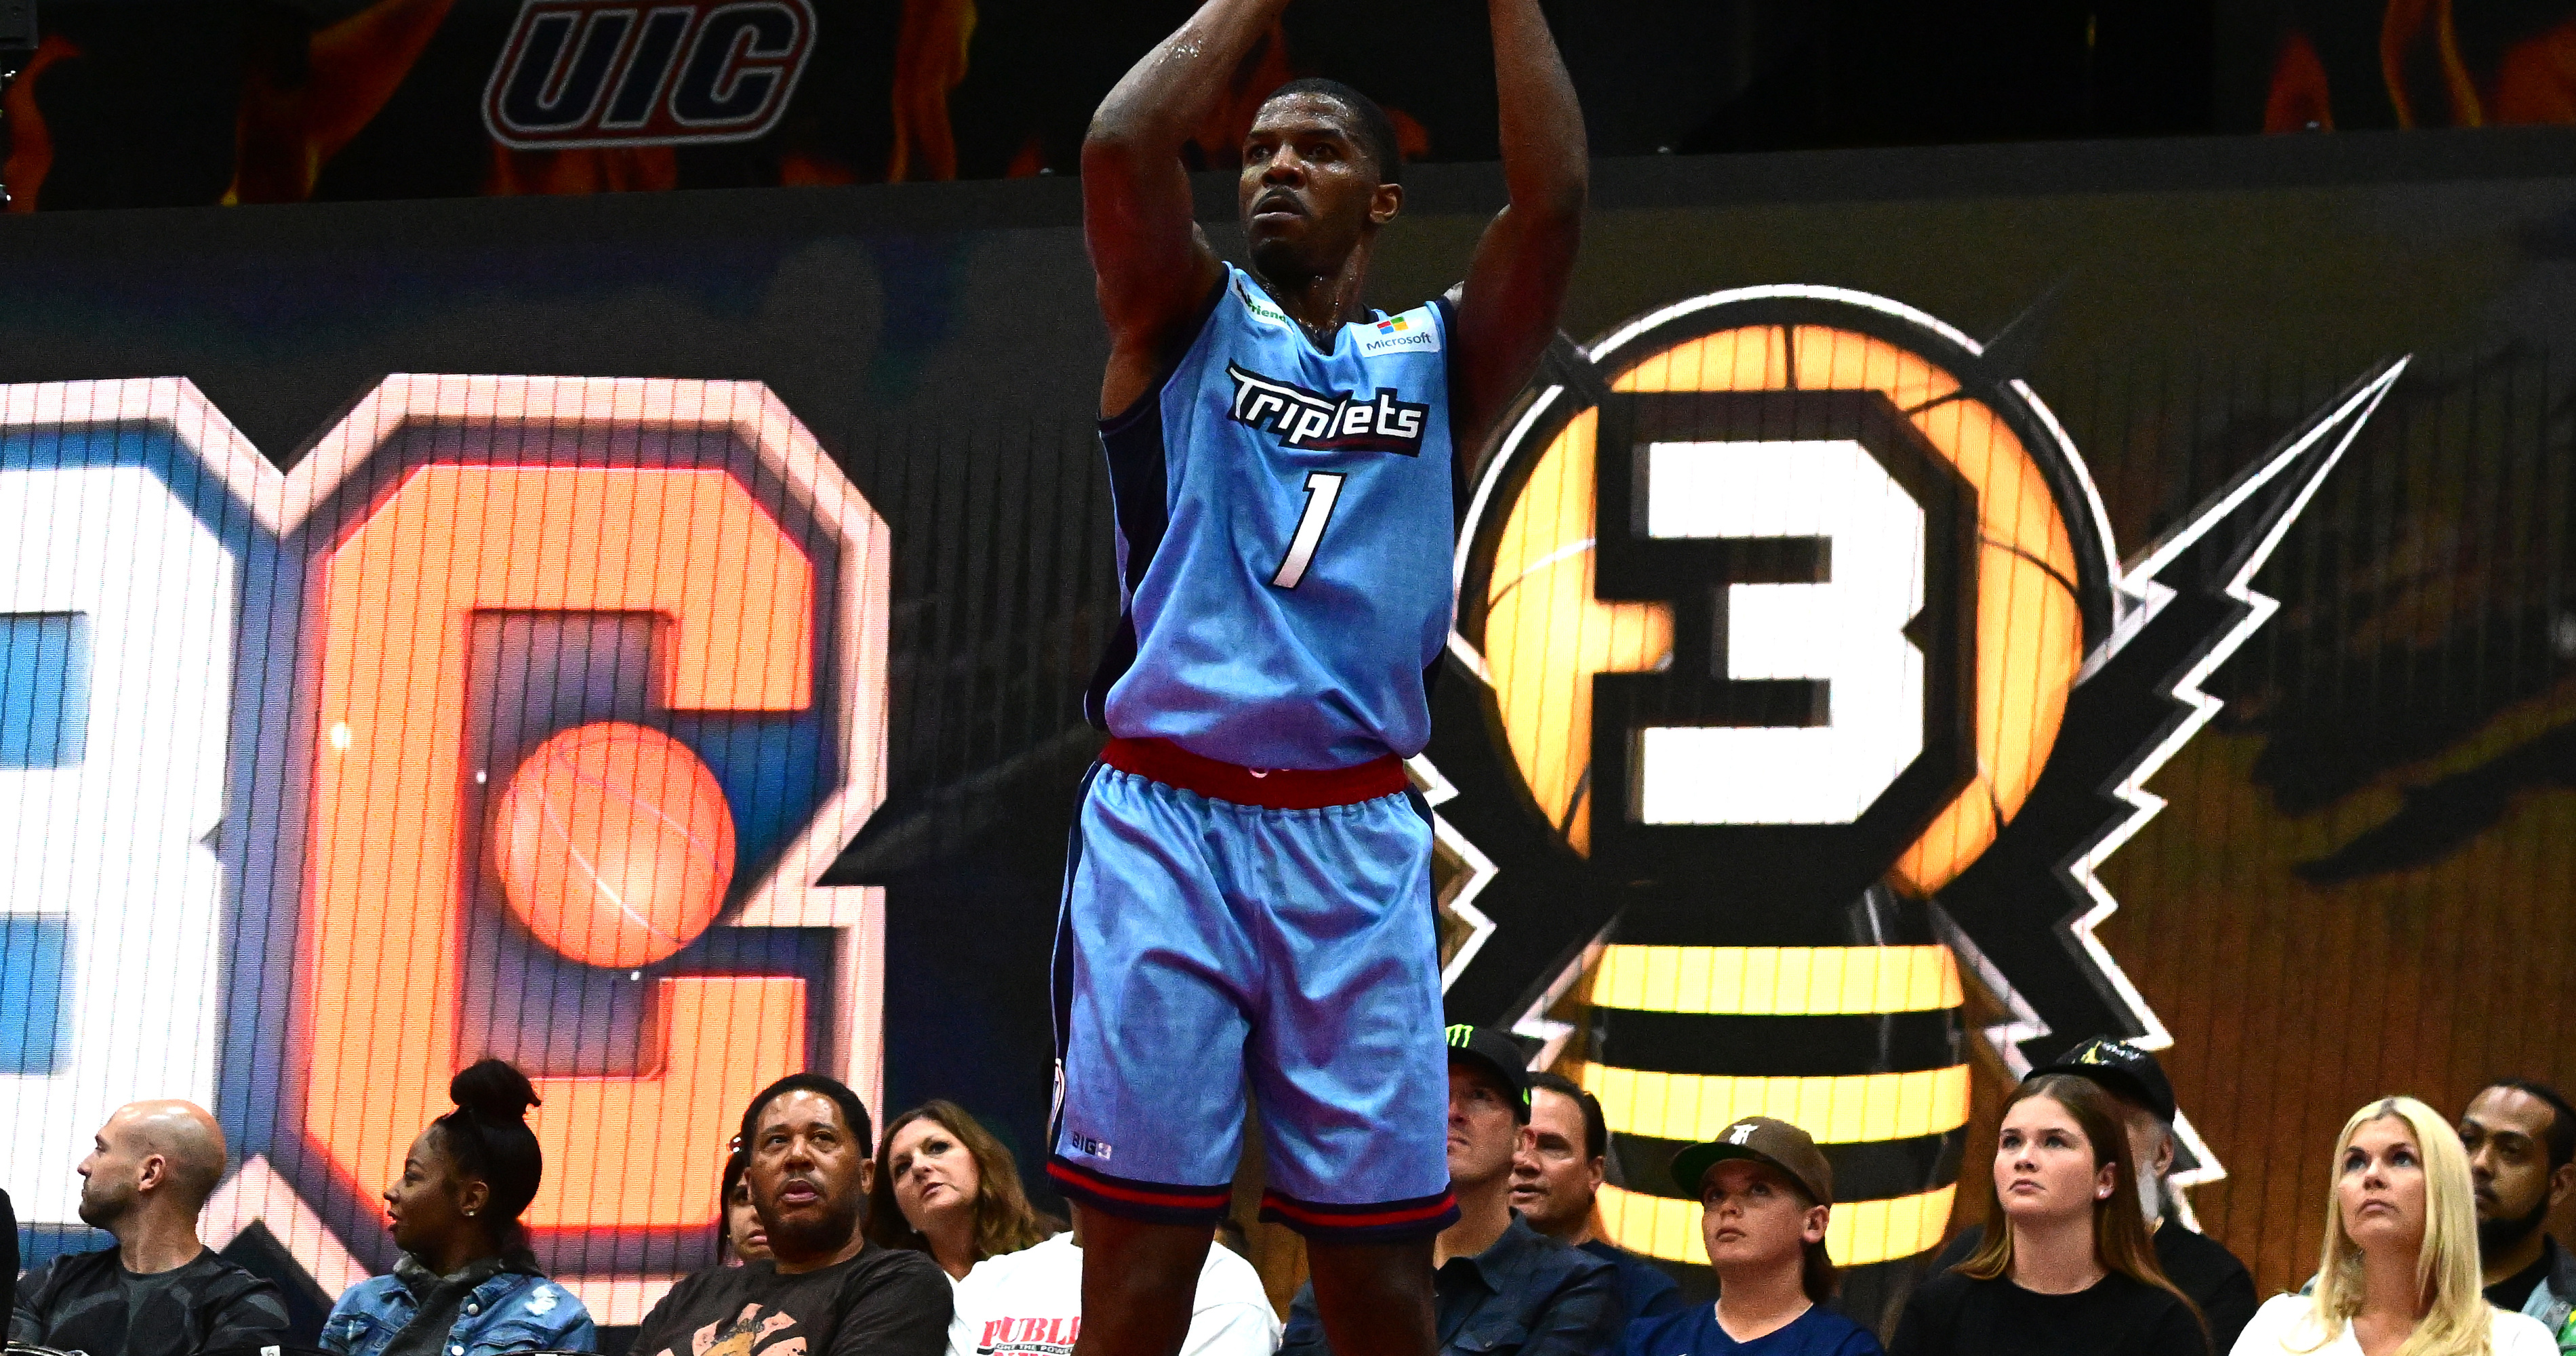 Big3 3-on-3 league begins with a game-winner and an injury – The